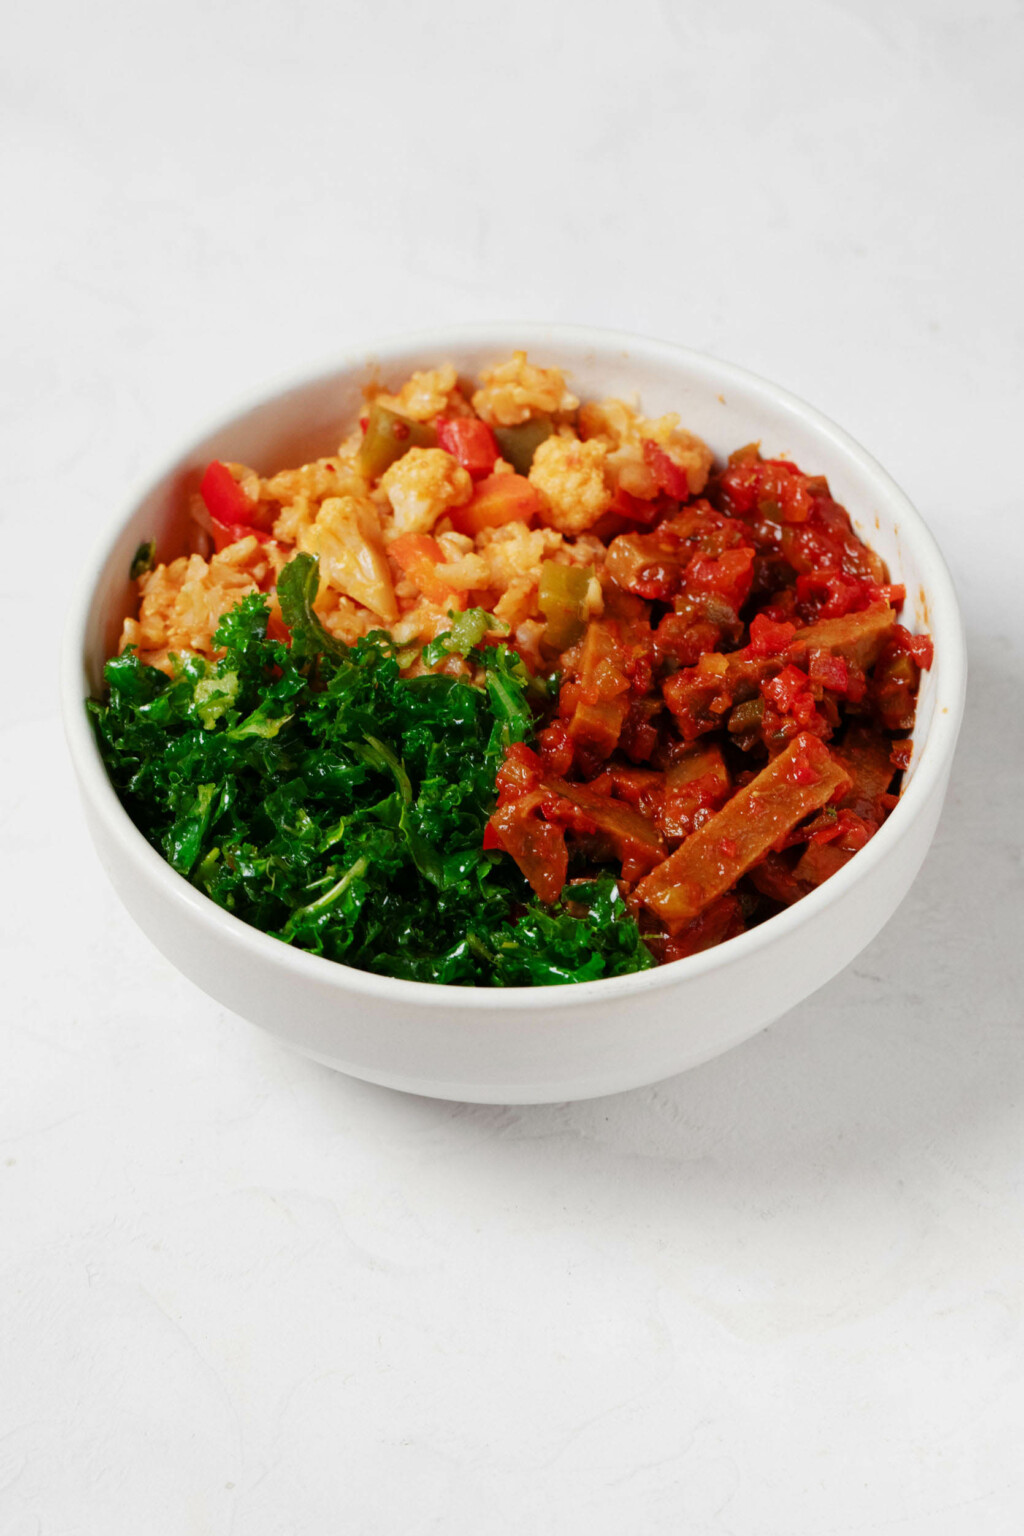 An image of a round white bowl, which has been filled with a colorful arrangement of rice, vegetables, spiced seitan, and curly green kale. It rests on a white surface.